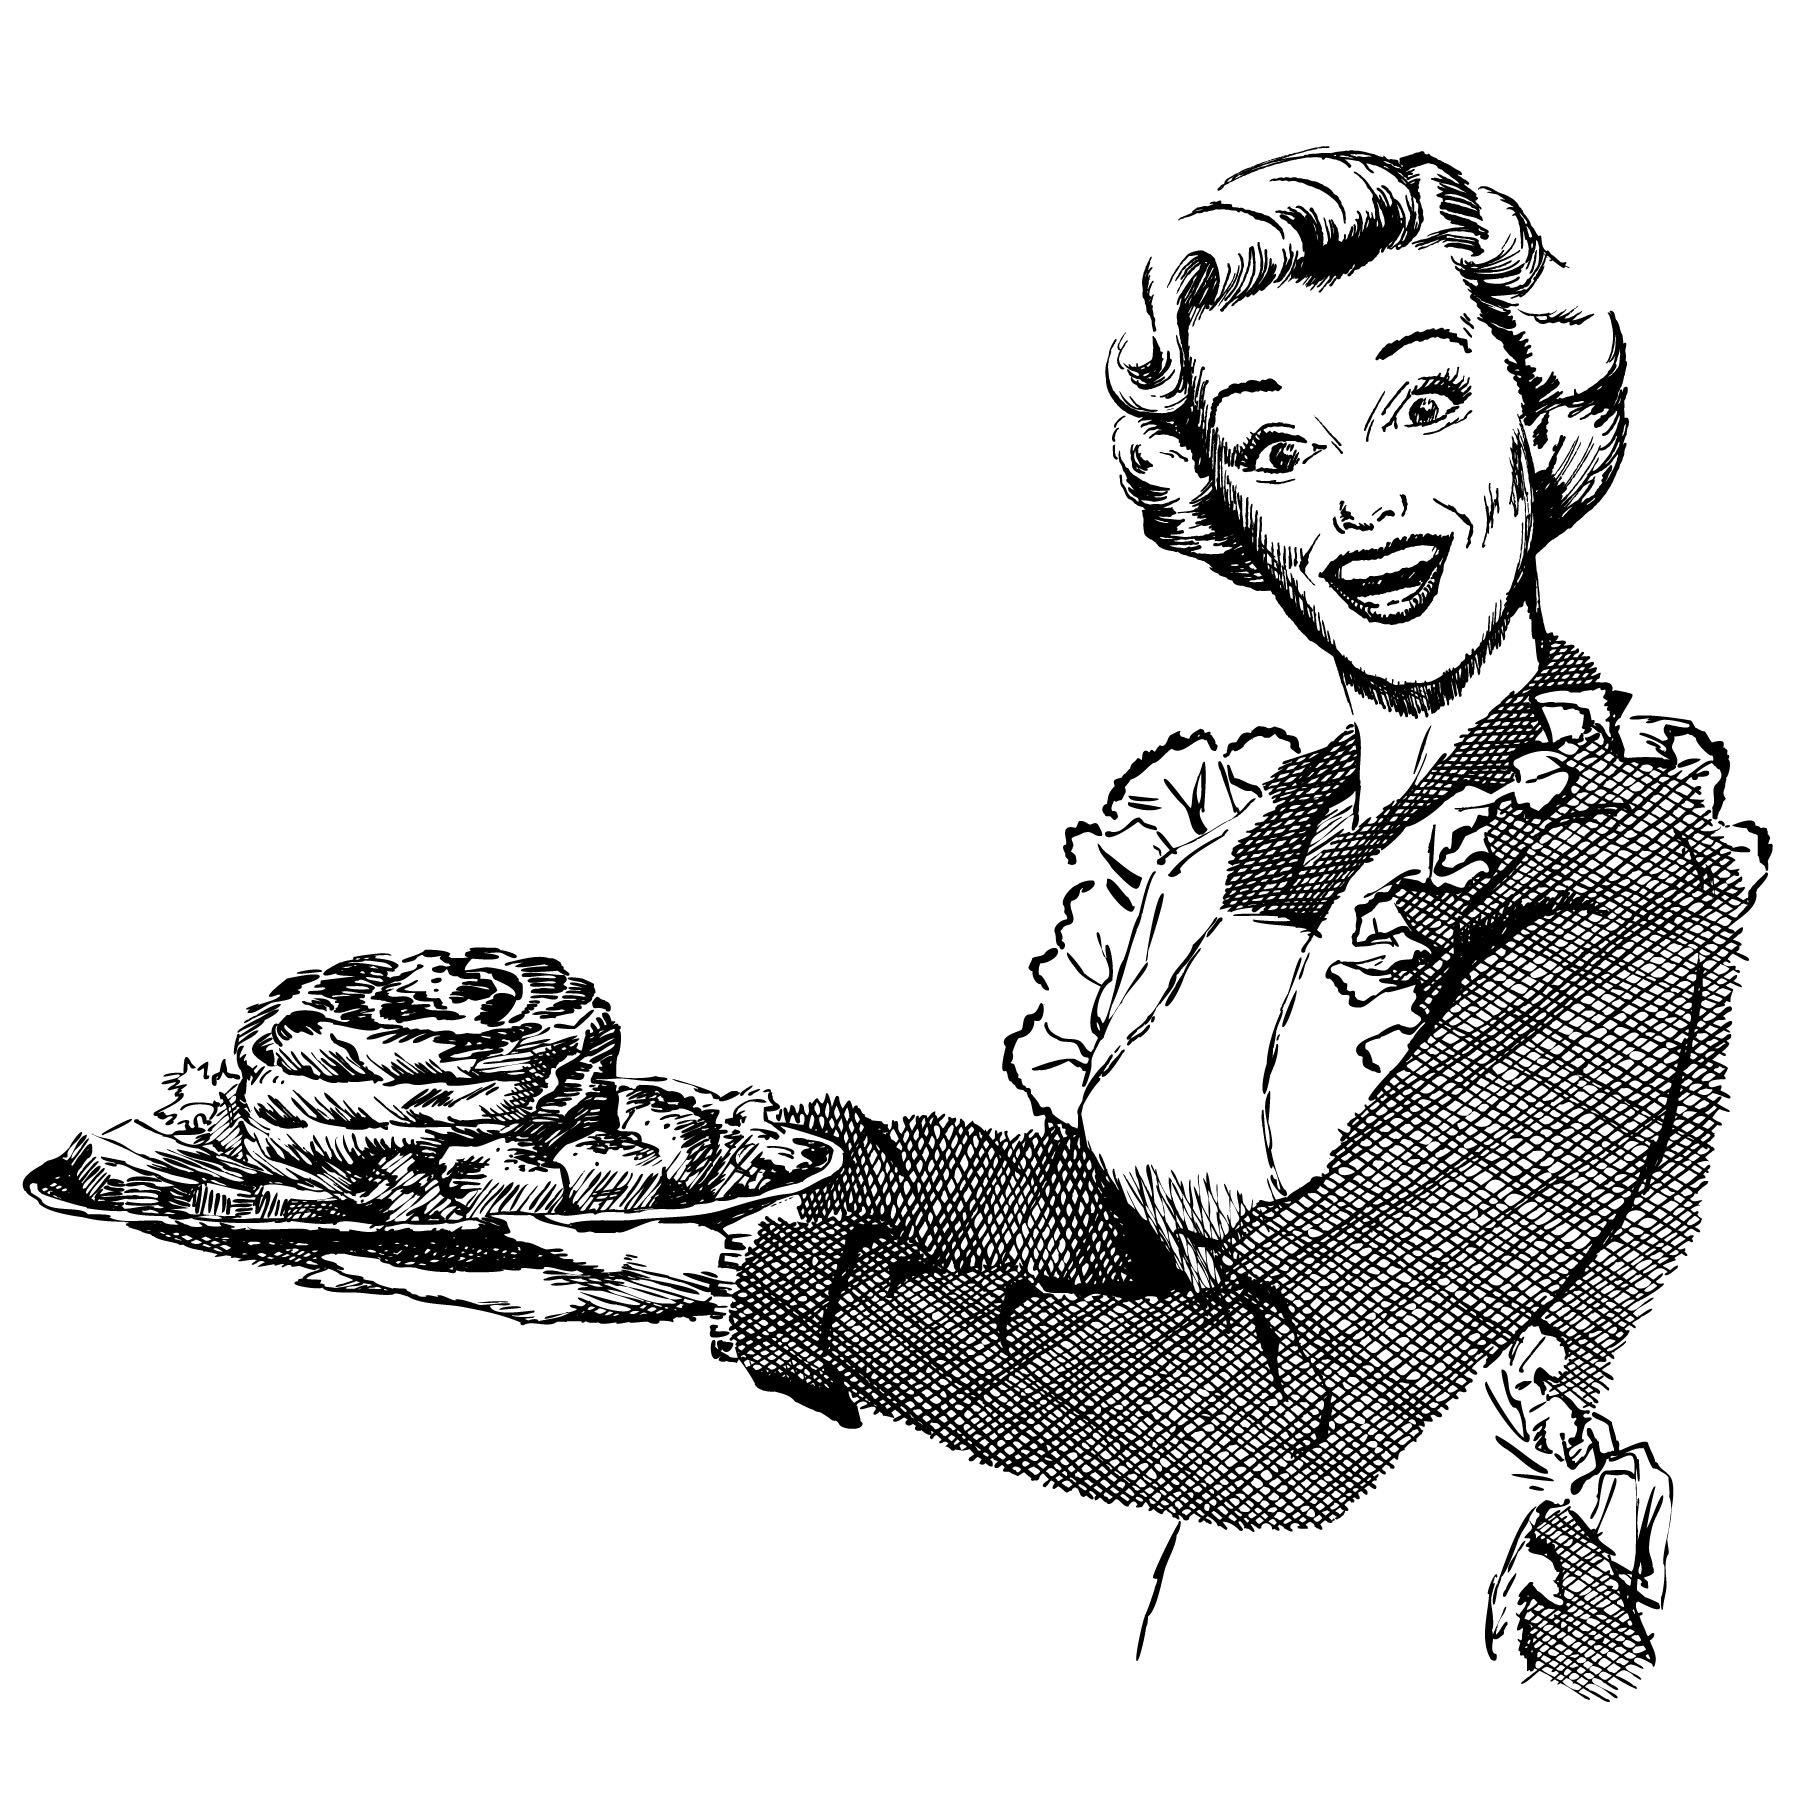 smiling woman in apron holding a tray of food